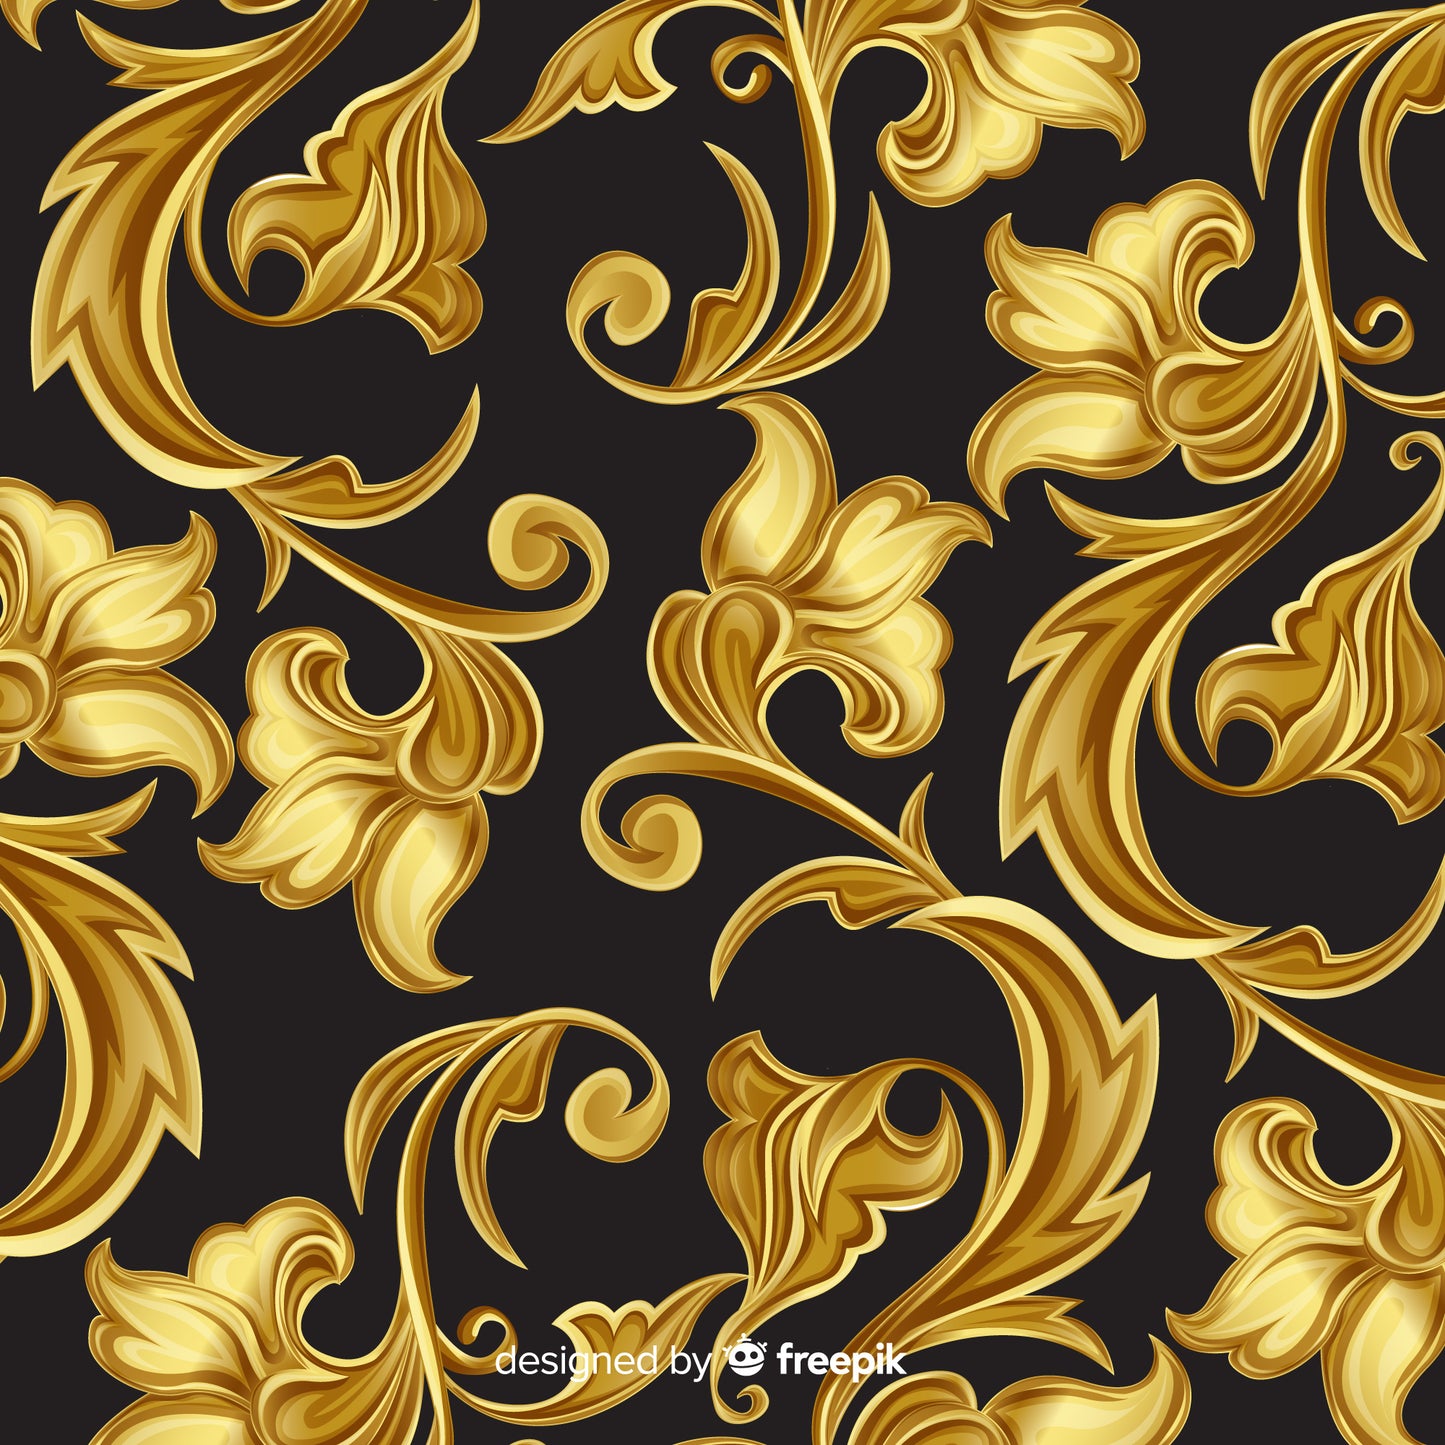 Golden ornamental floral decorative background wallpaper for wall